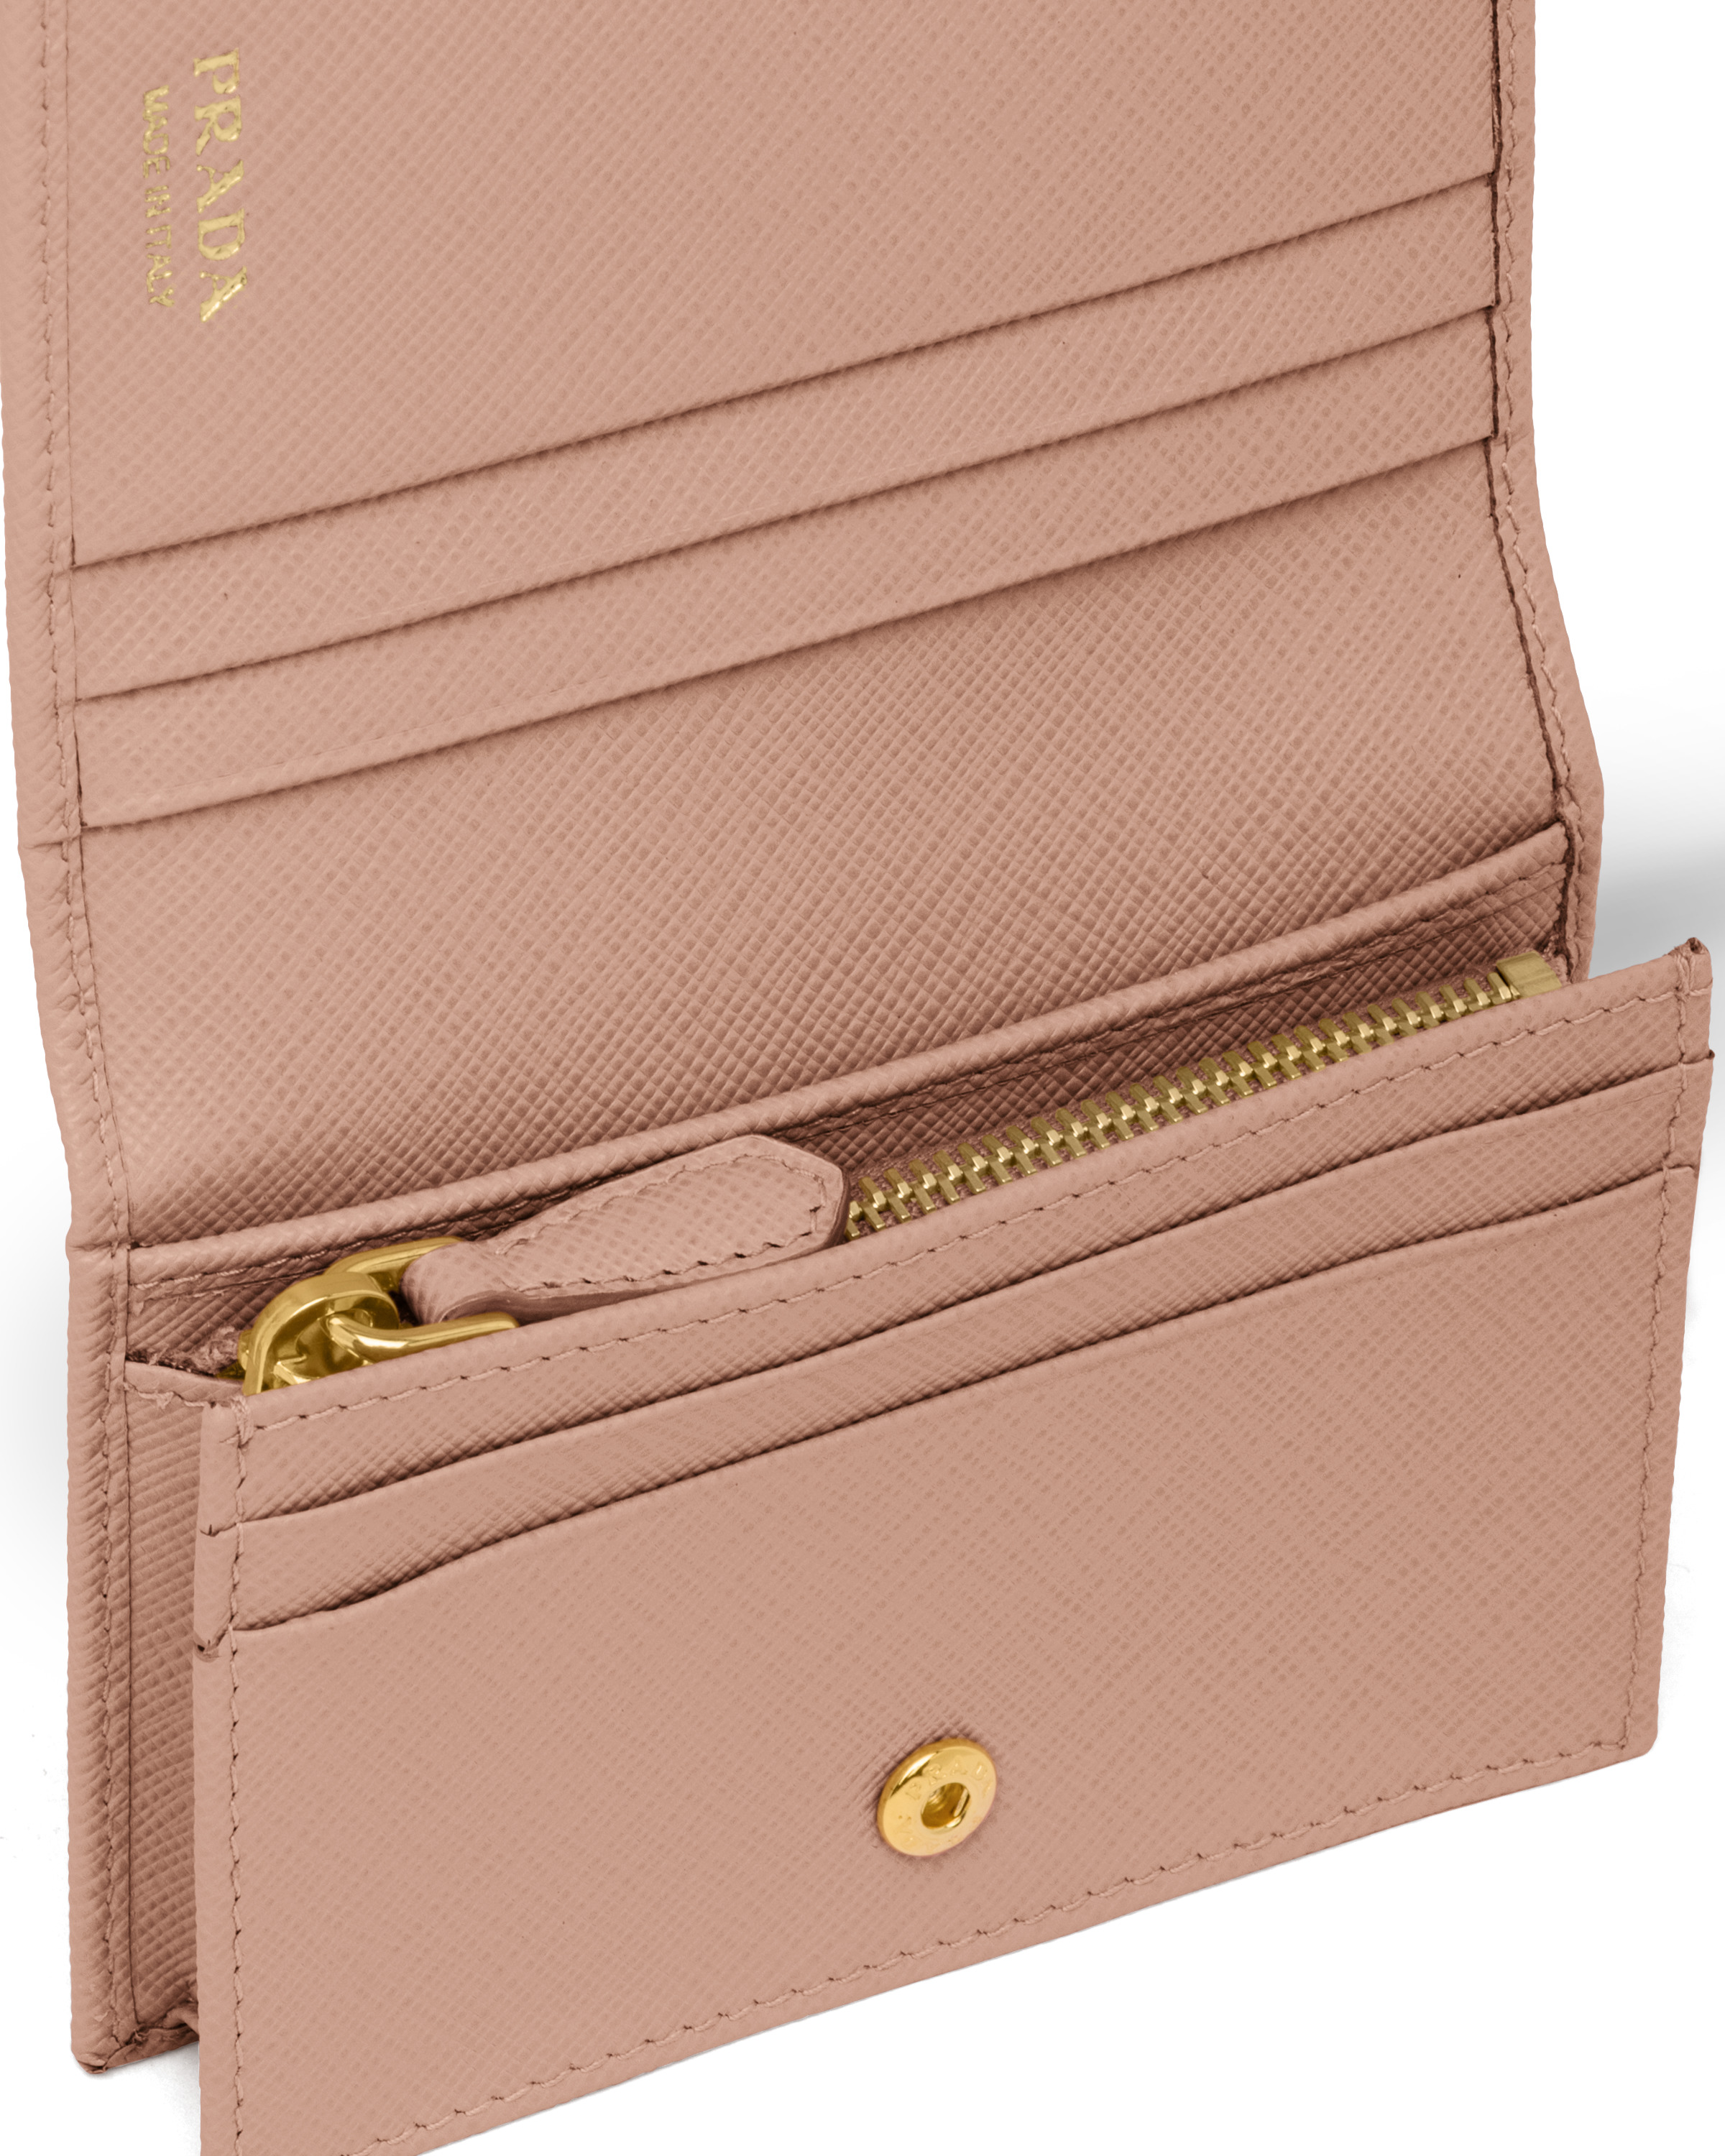 Small Saffiano Leather Wallet - 5